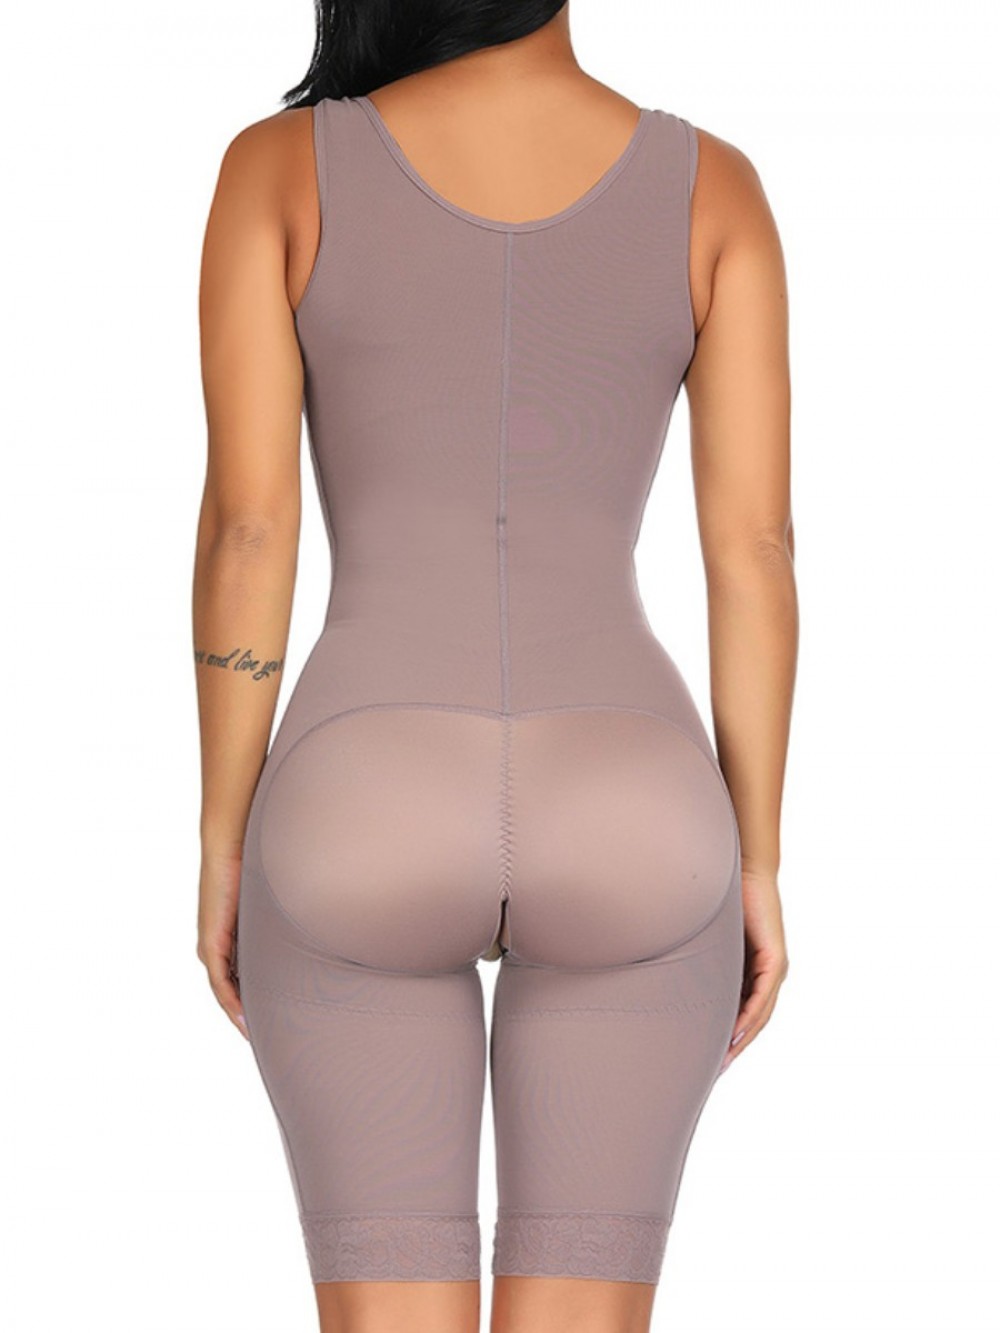 Brown Queen Size Plain Crotchless Bodysuit Unpadded Blood Circulation Boosting